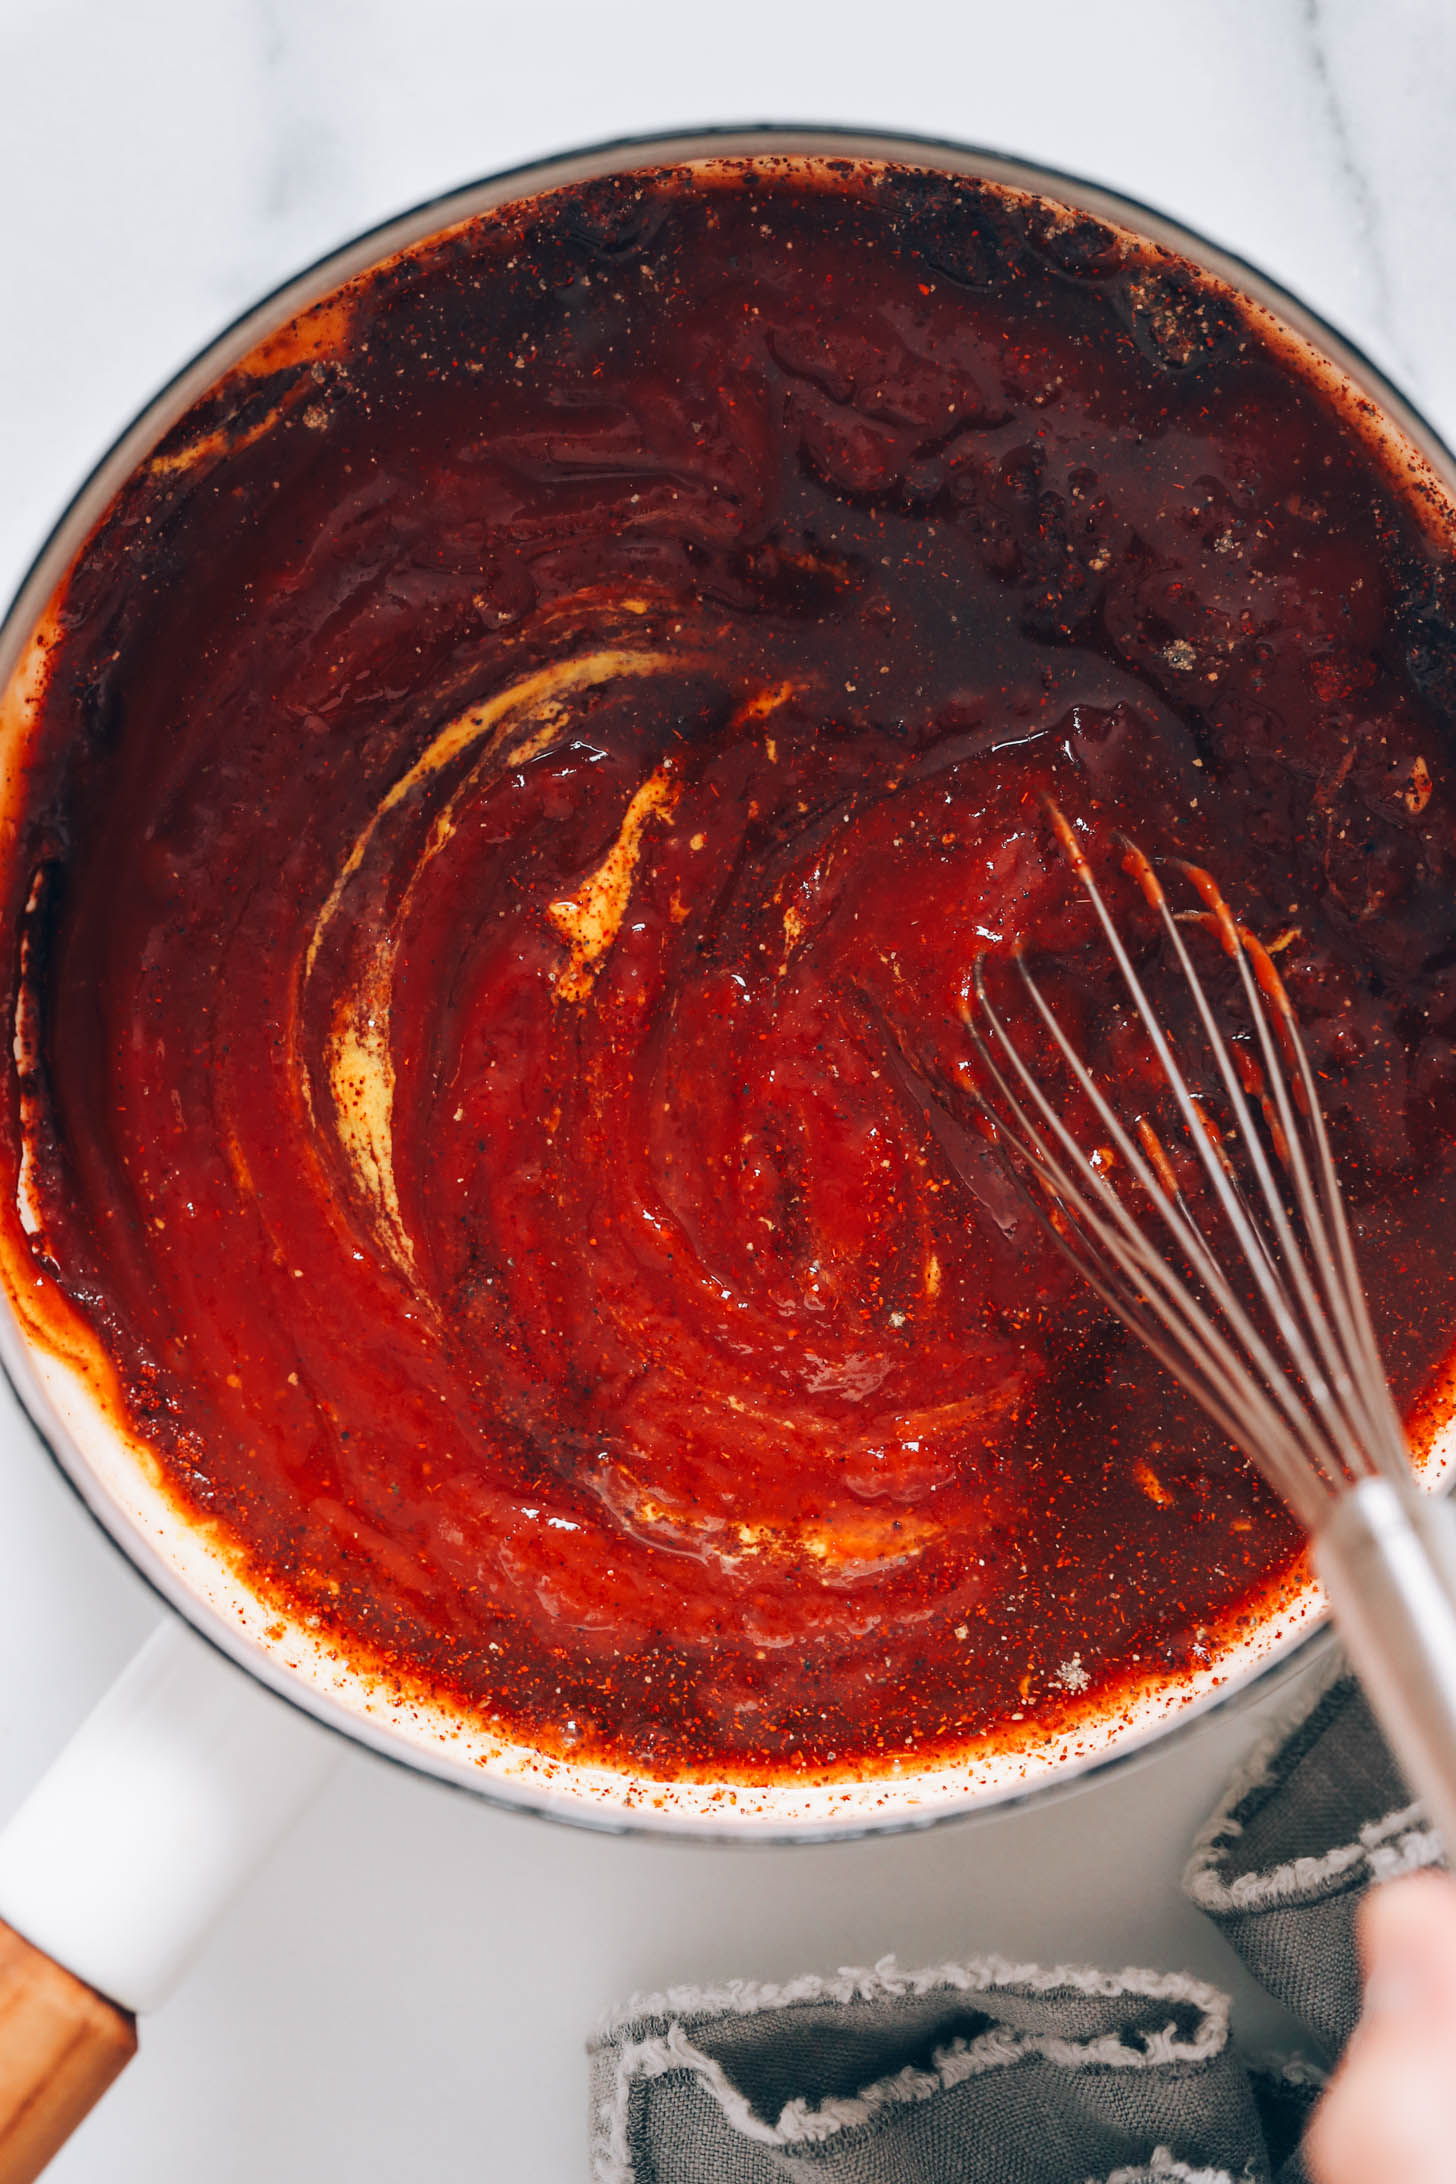 Using a whisk to combine the ketchup, mustard, spices, and other ingredients